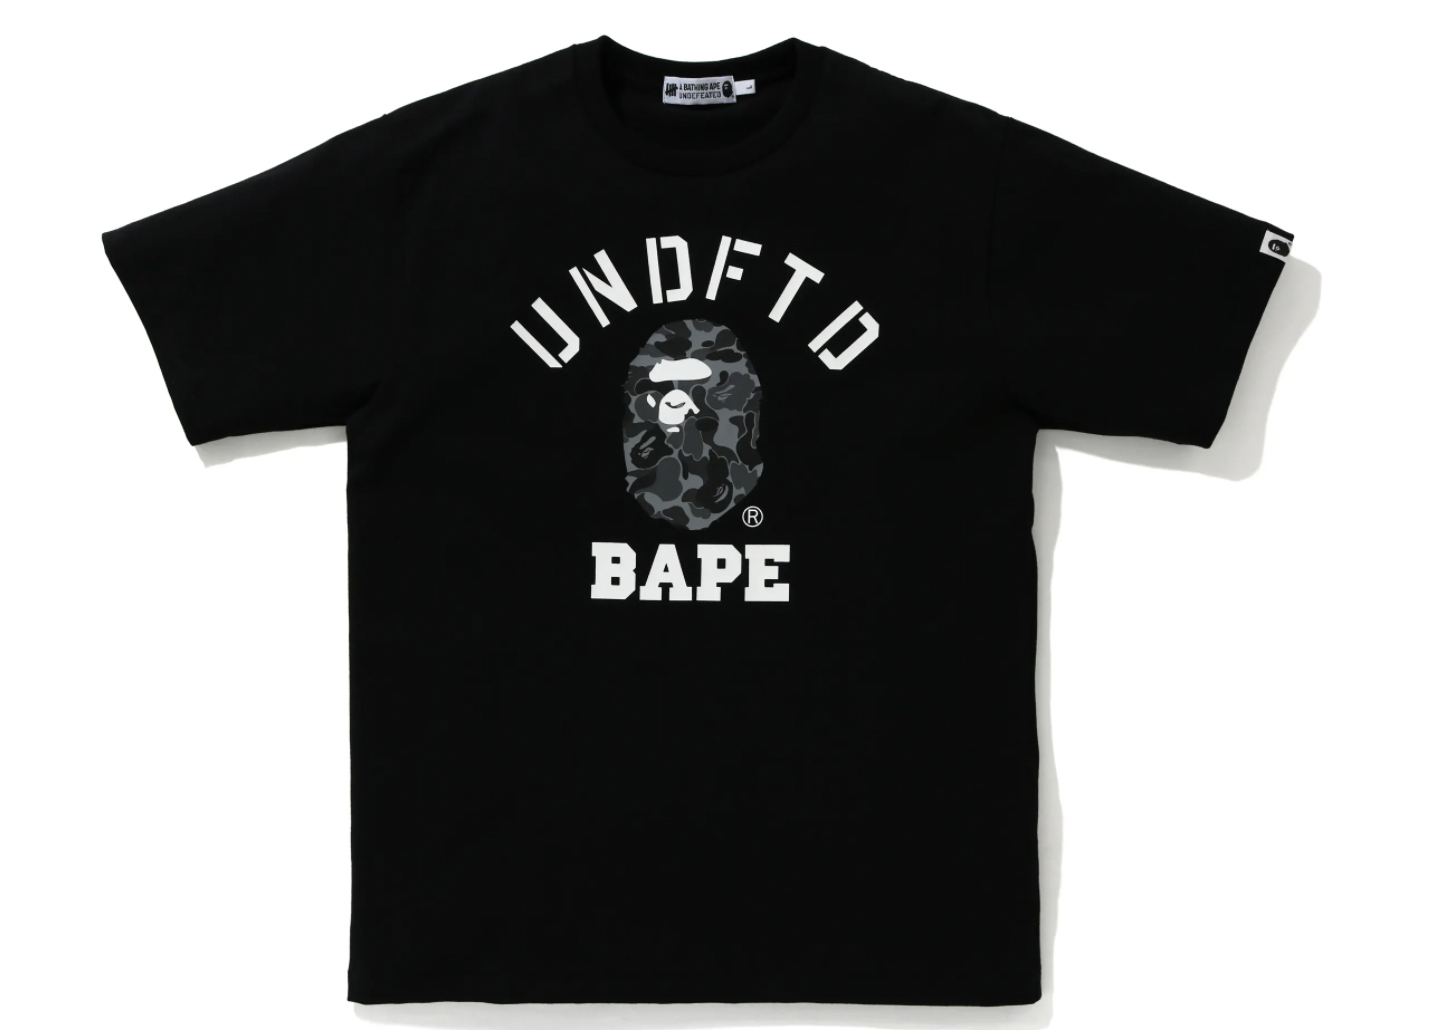 BAPE x Undefeated 005 Tee (FW22) White Green